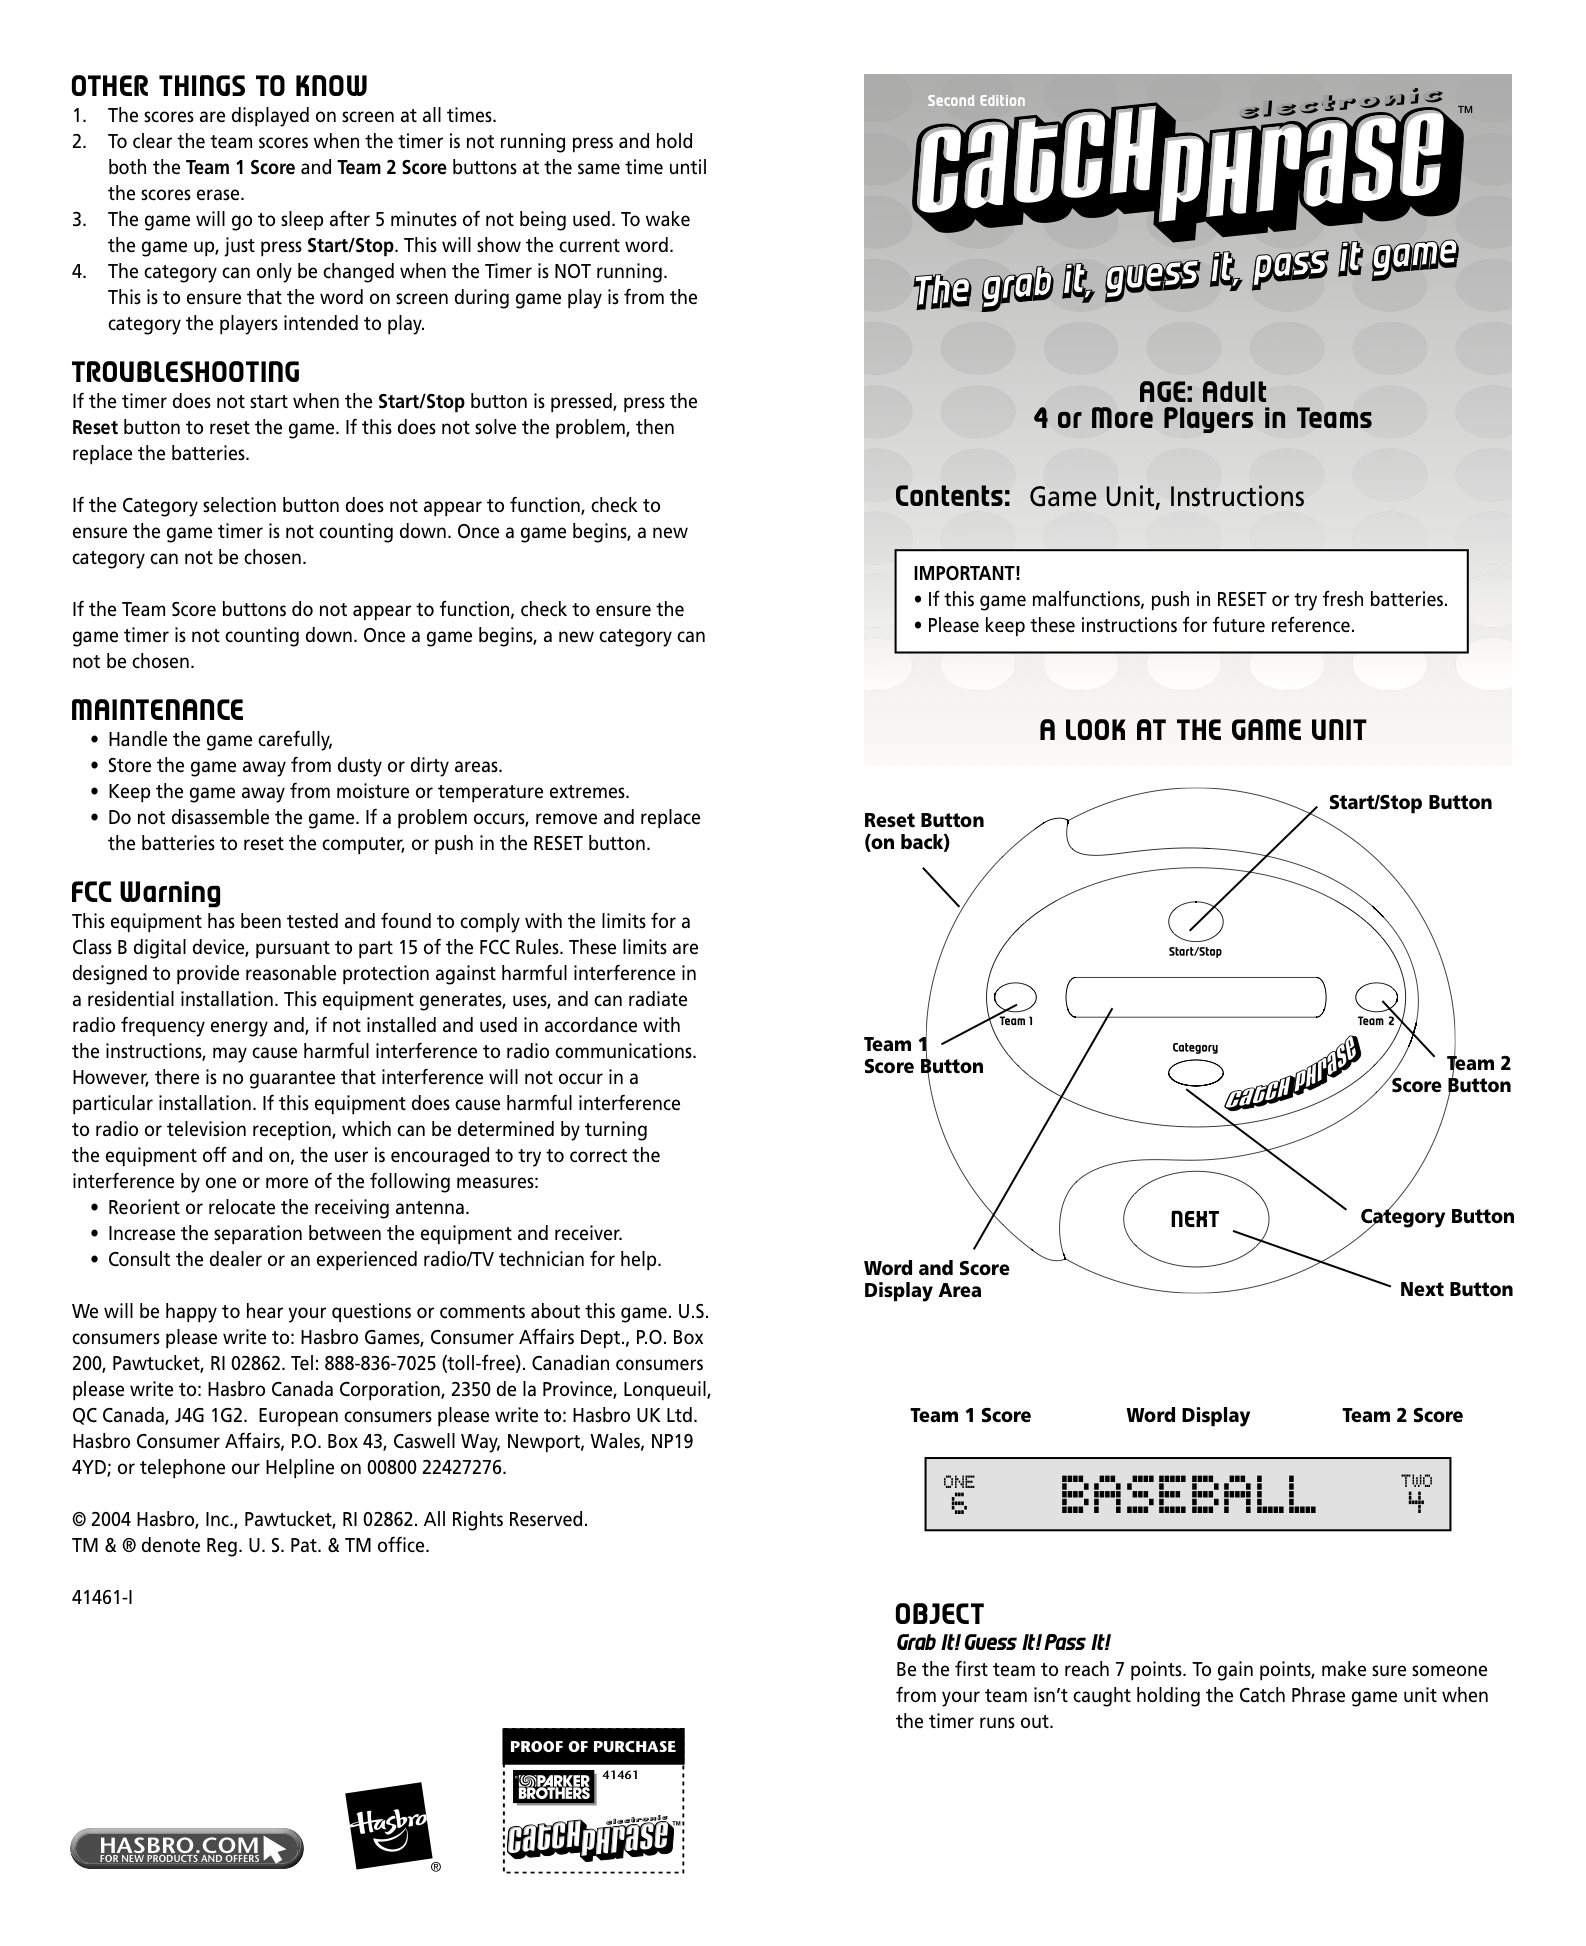 A scanned copy of the original rules that came with Catch Phrase by Hasbro. Front side.